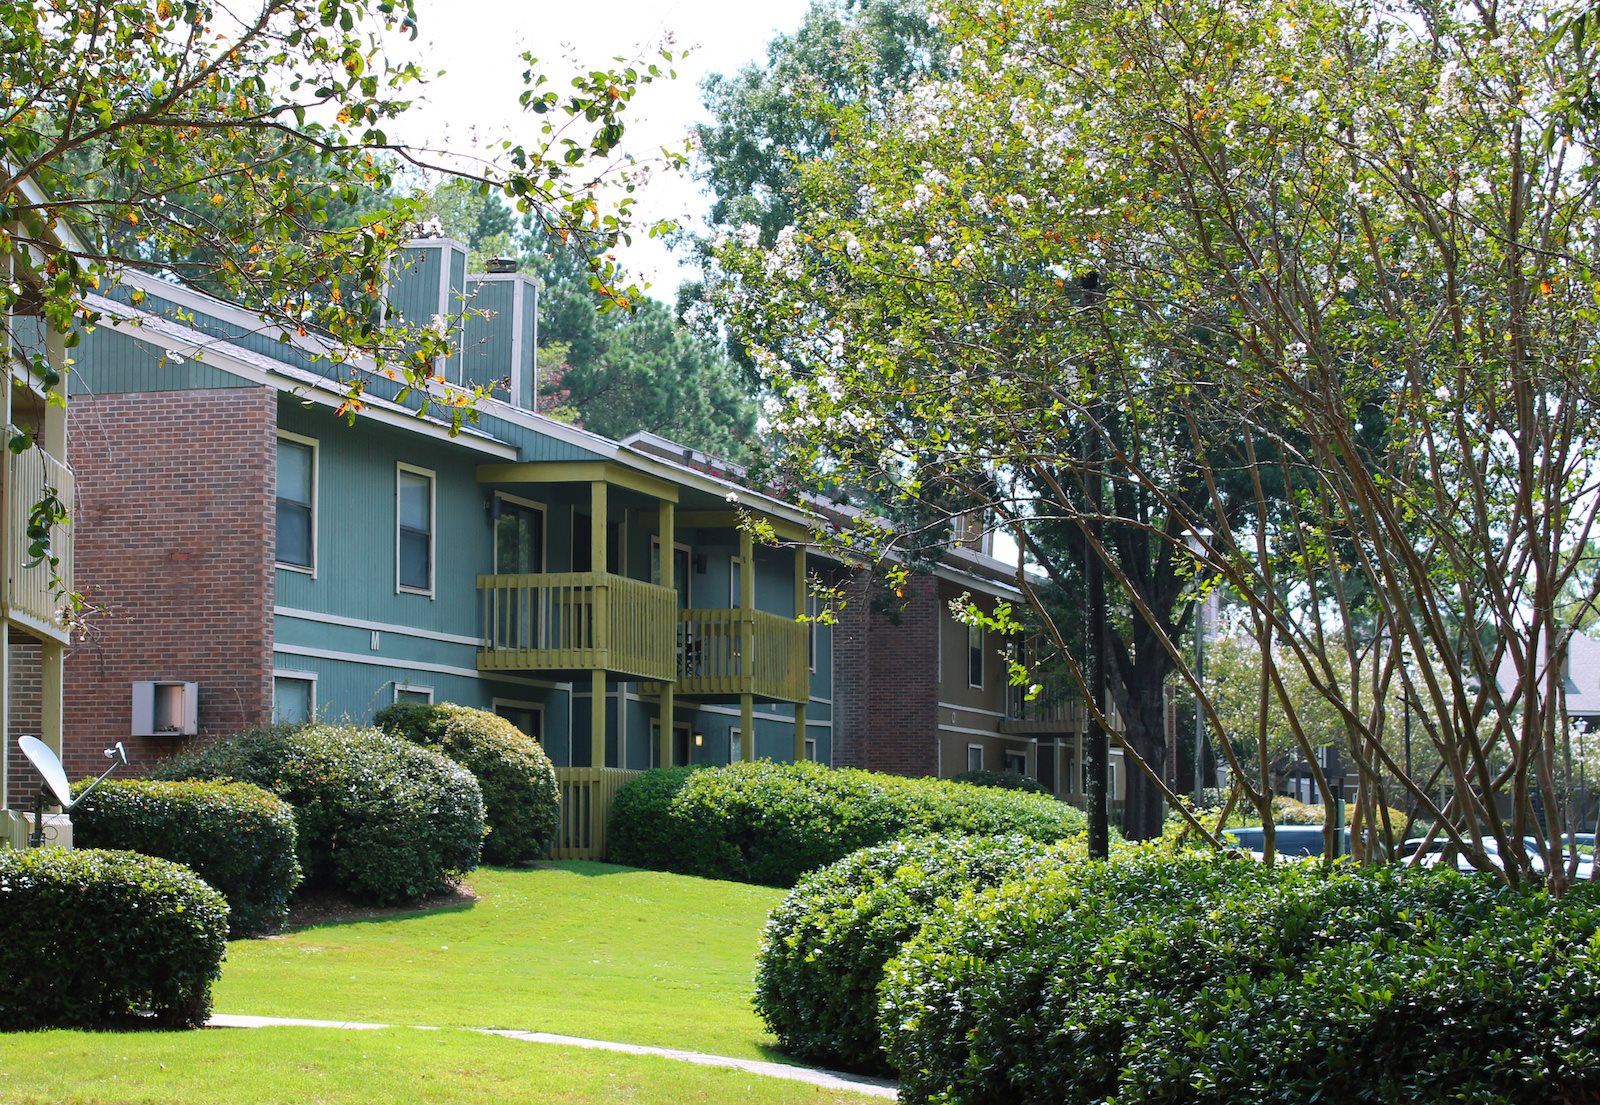 Exterior of apartment buildings with lush landscaping